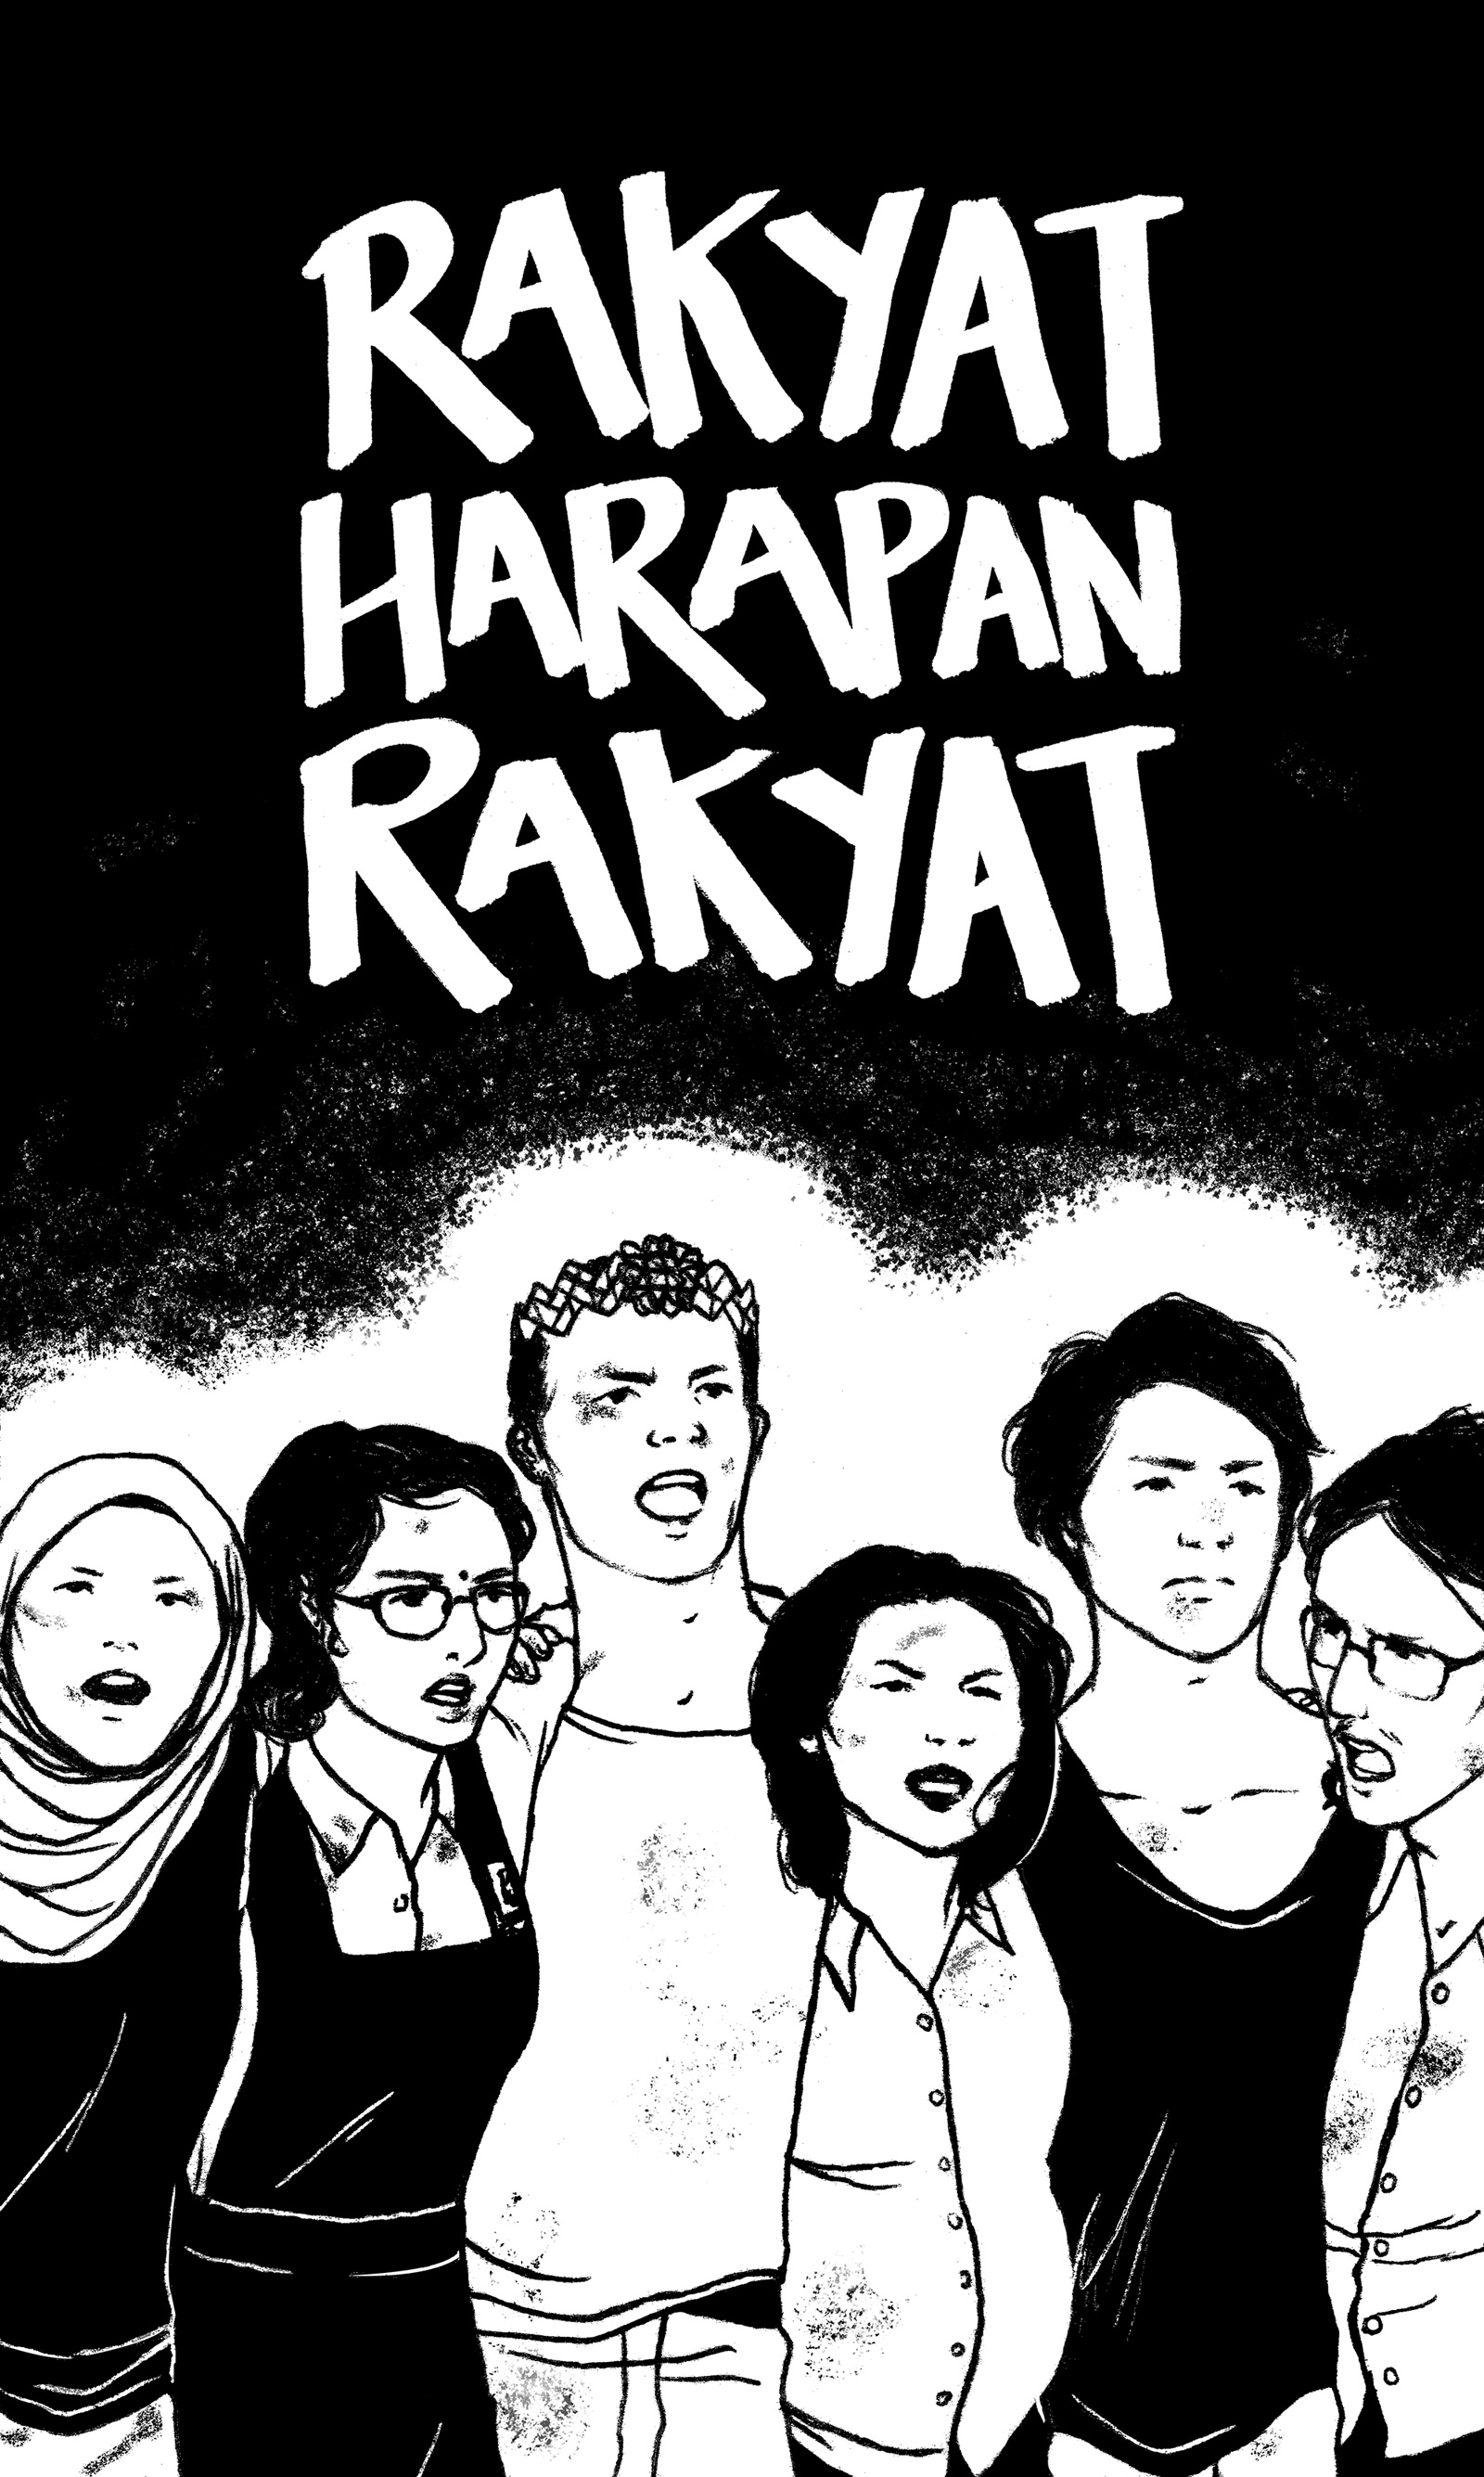 Rakyat Harapan Rakyat (The People are the Hope of the People) by Sonia Luhung Wan